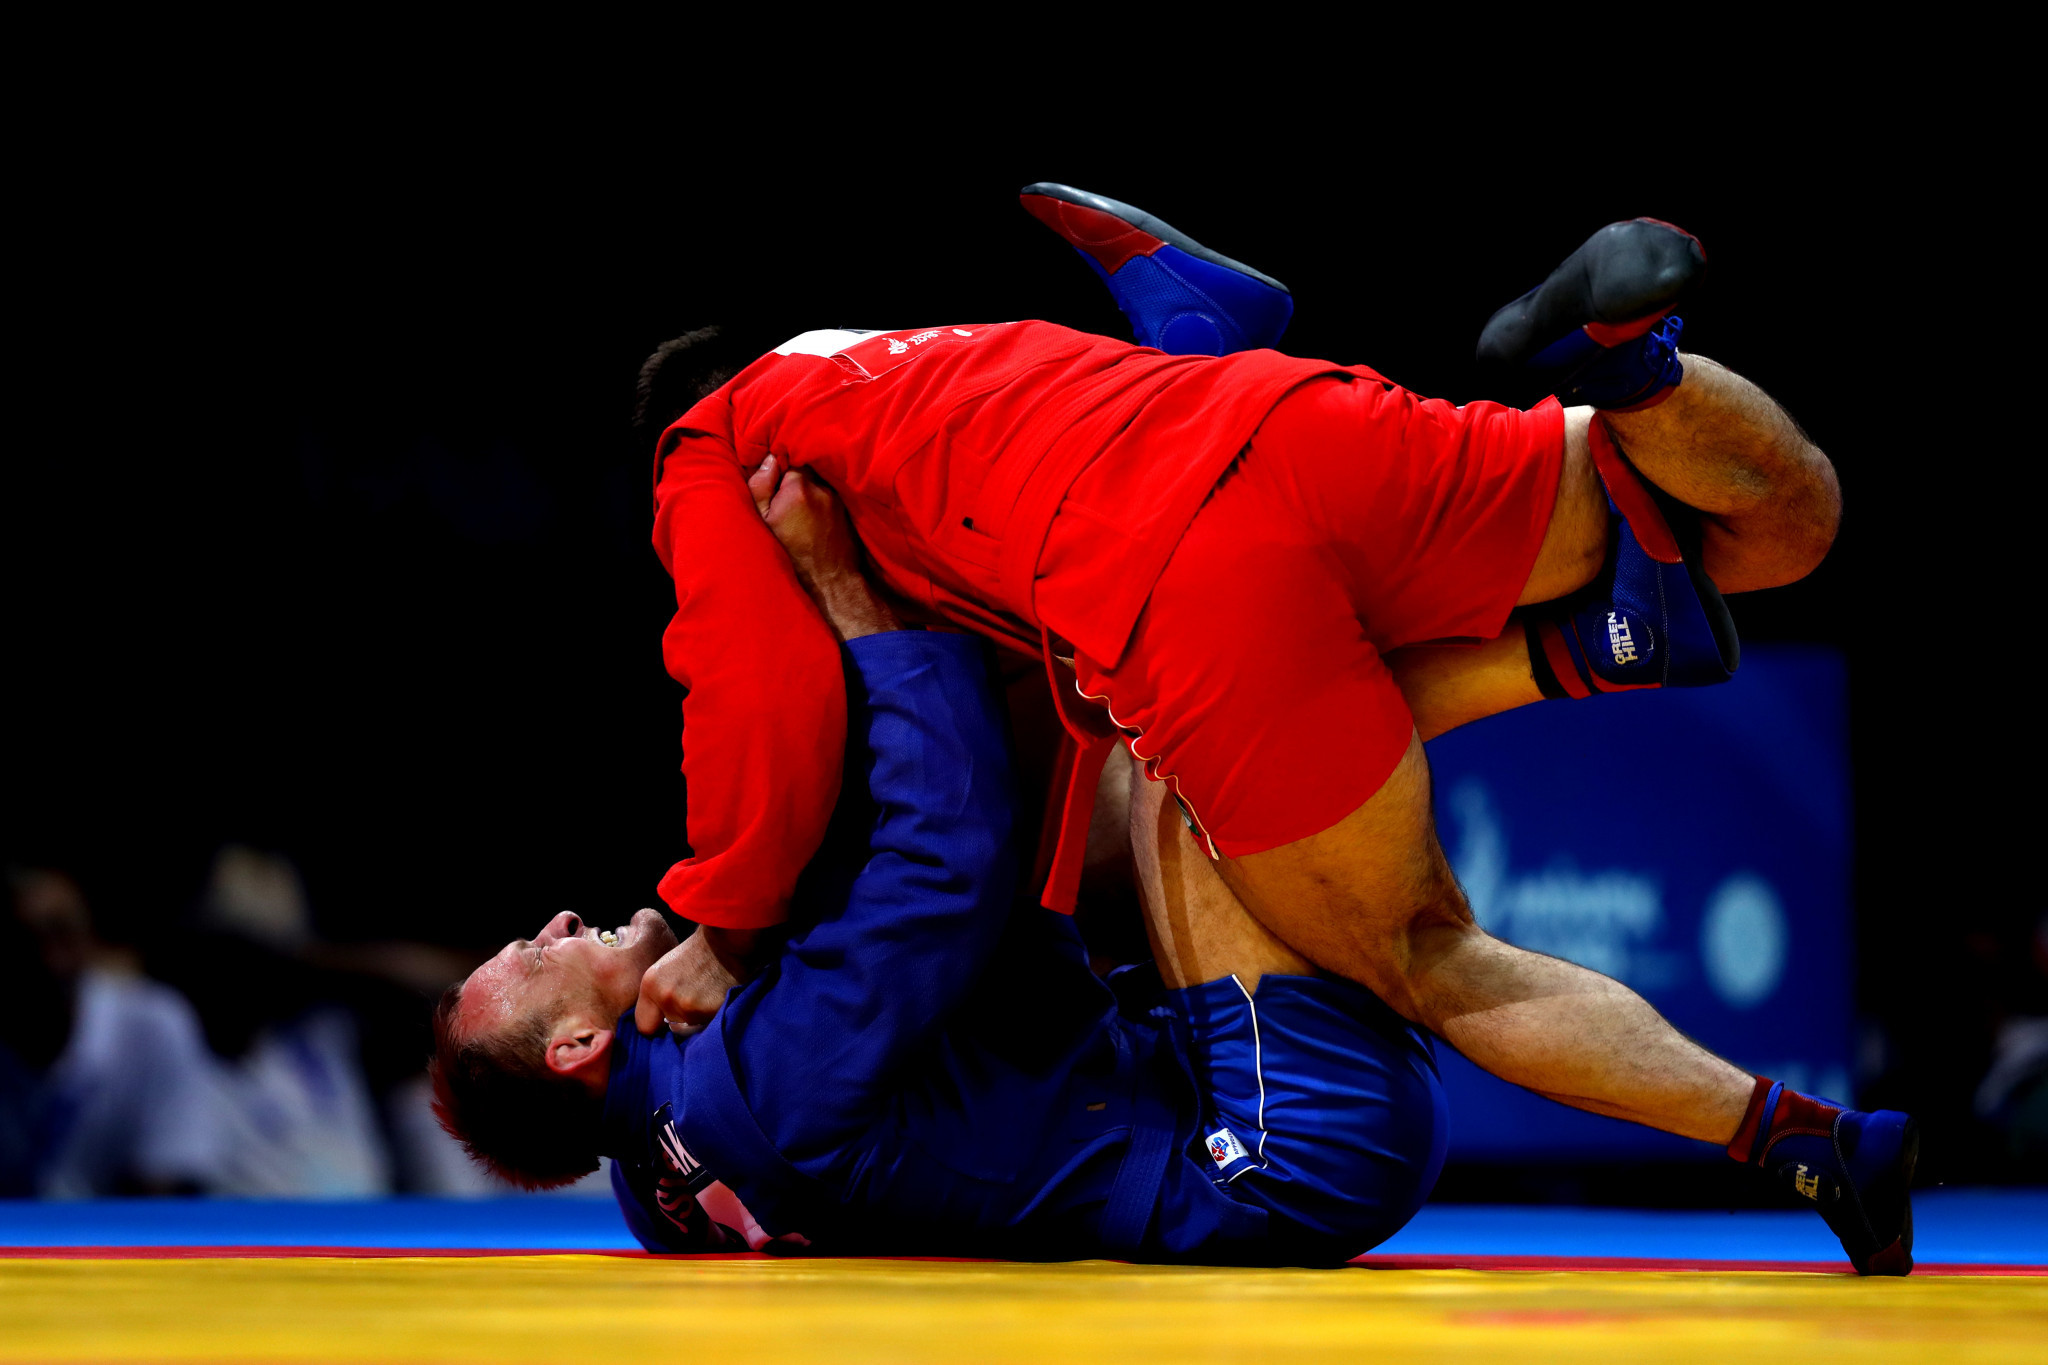 Other sports were taking place across the city, with sambo concluding at the Sports Palace ©Minsk 2019